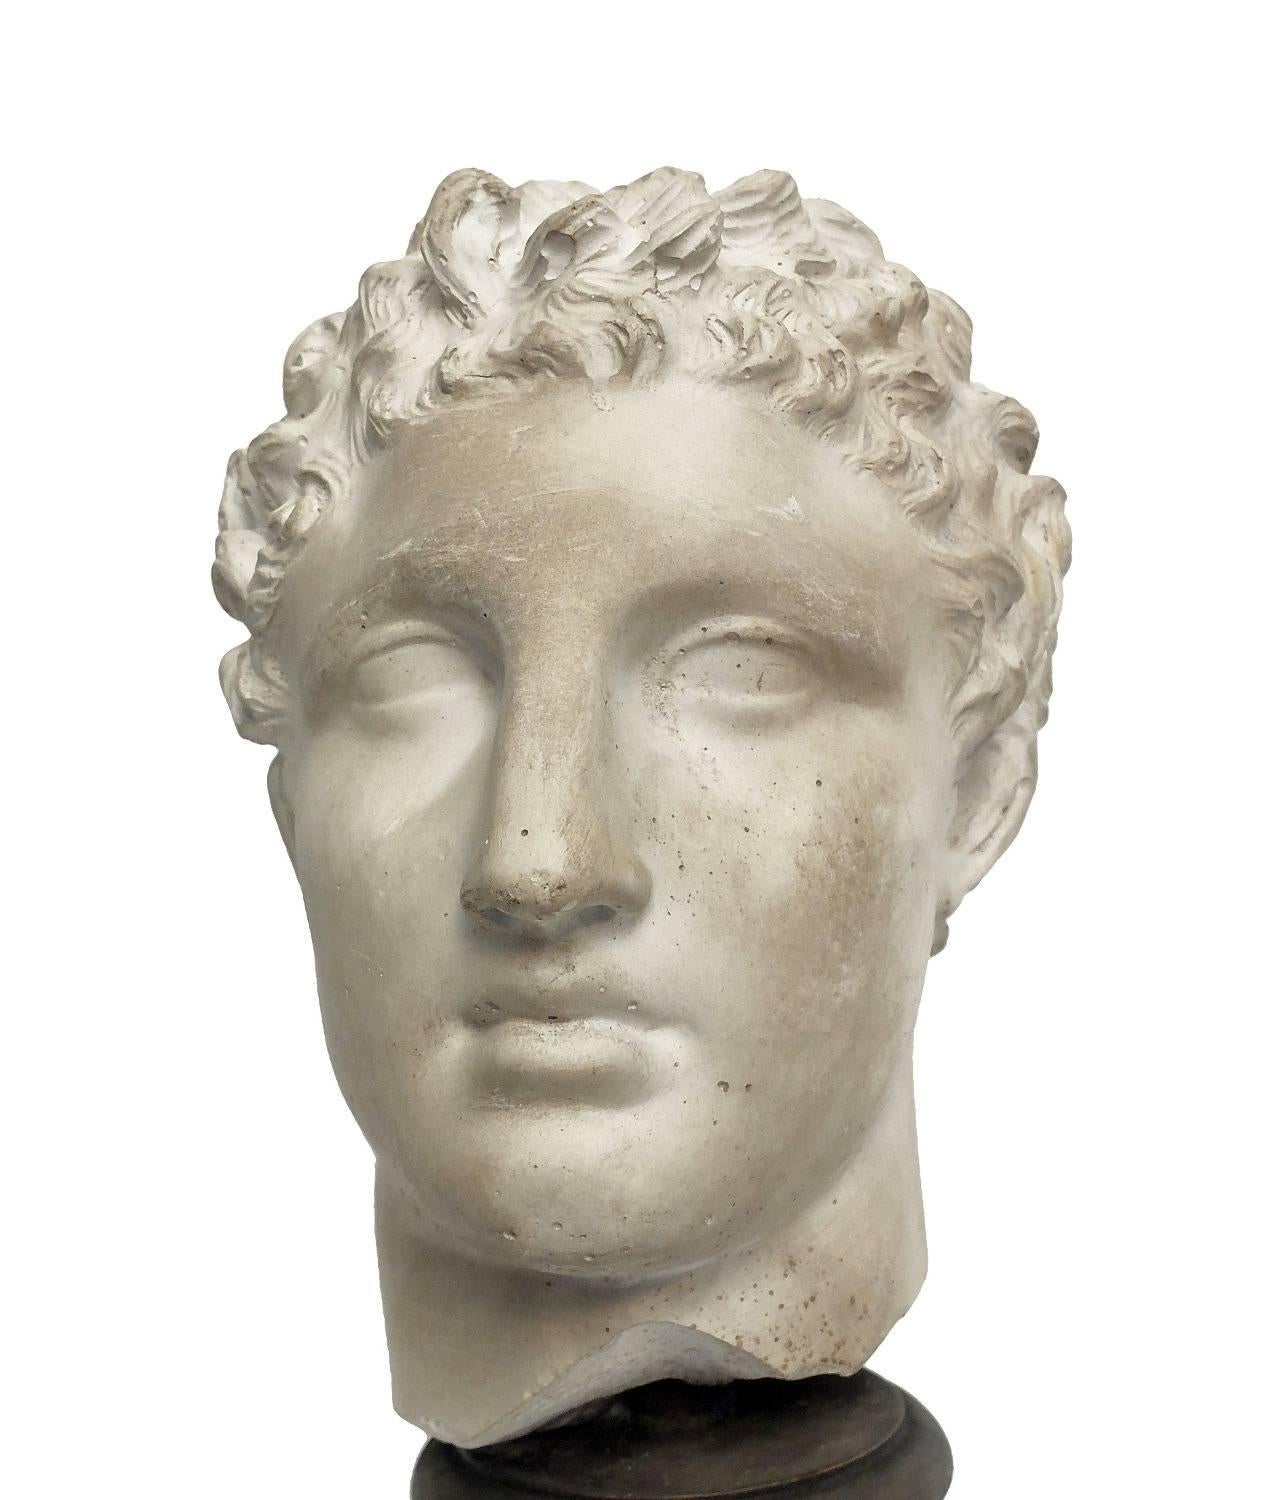 Late 19th Century Academic Cast of Plaster Depicting Hermes' Head